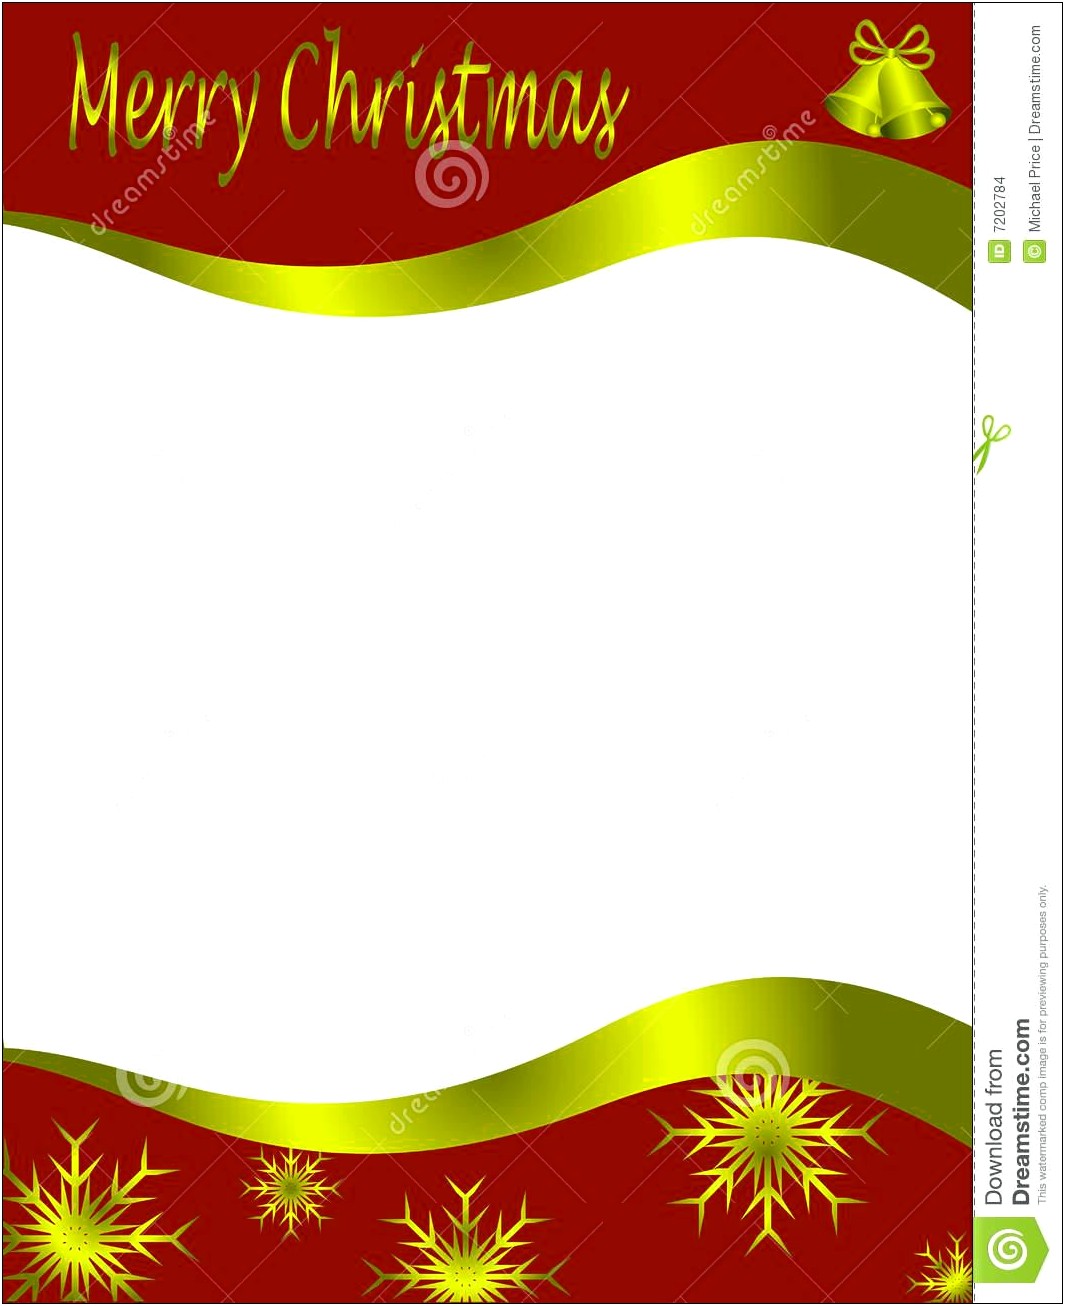 Free Christmas Letter Templates To Print